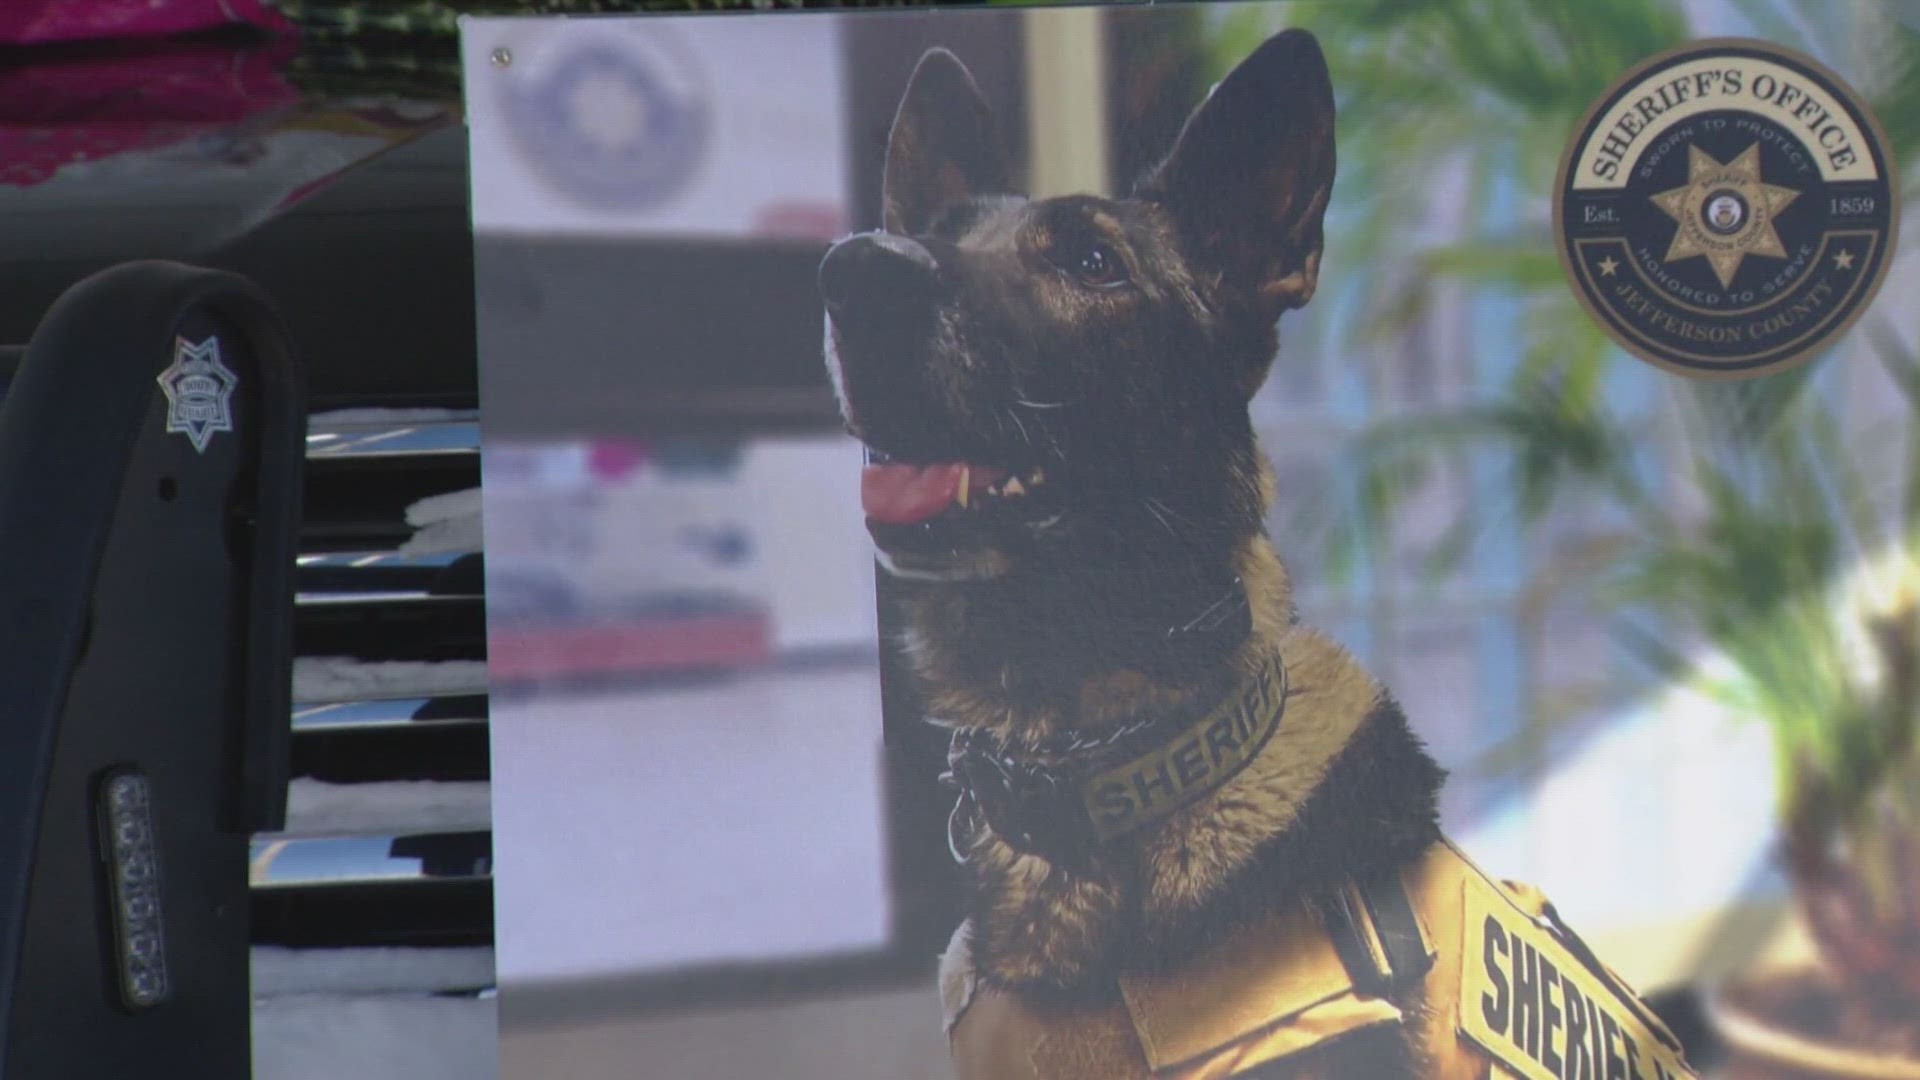 A man who shot and killed a Jefferson County Sheriff's Office K-9 was sentenced Friday to 12 years in prison.